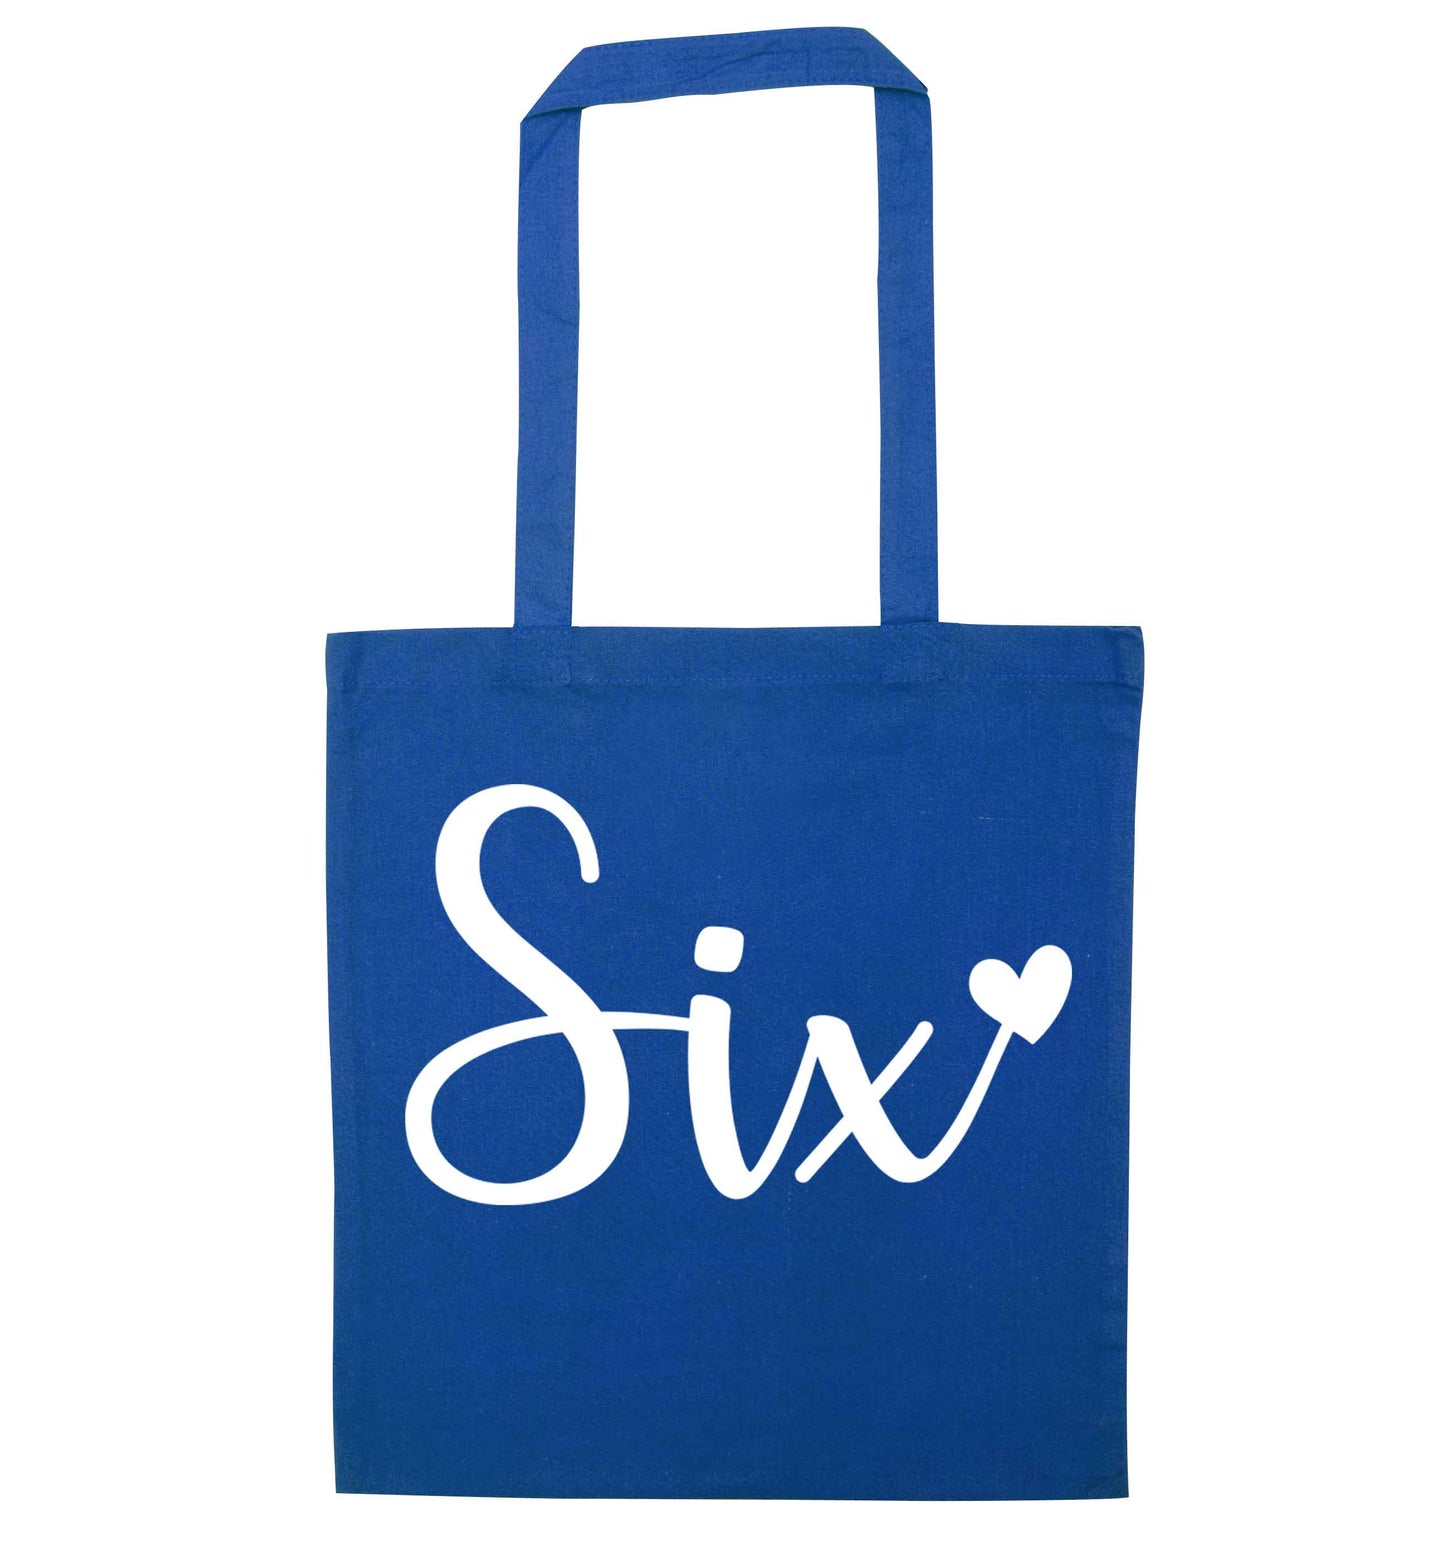 Six and heart! blue tote bag